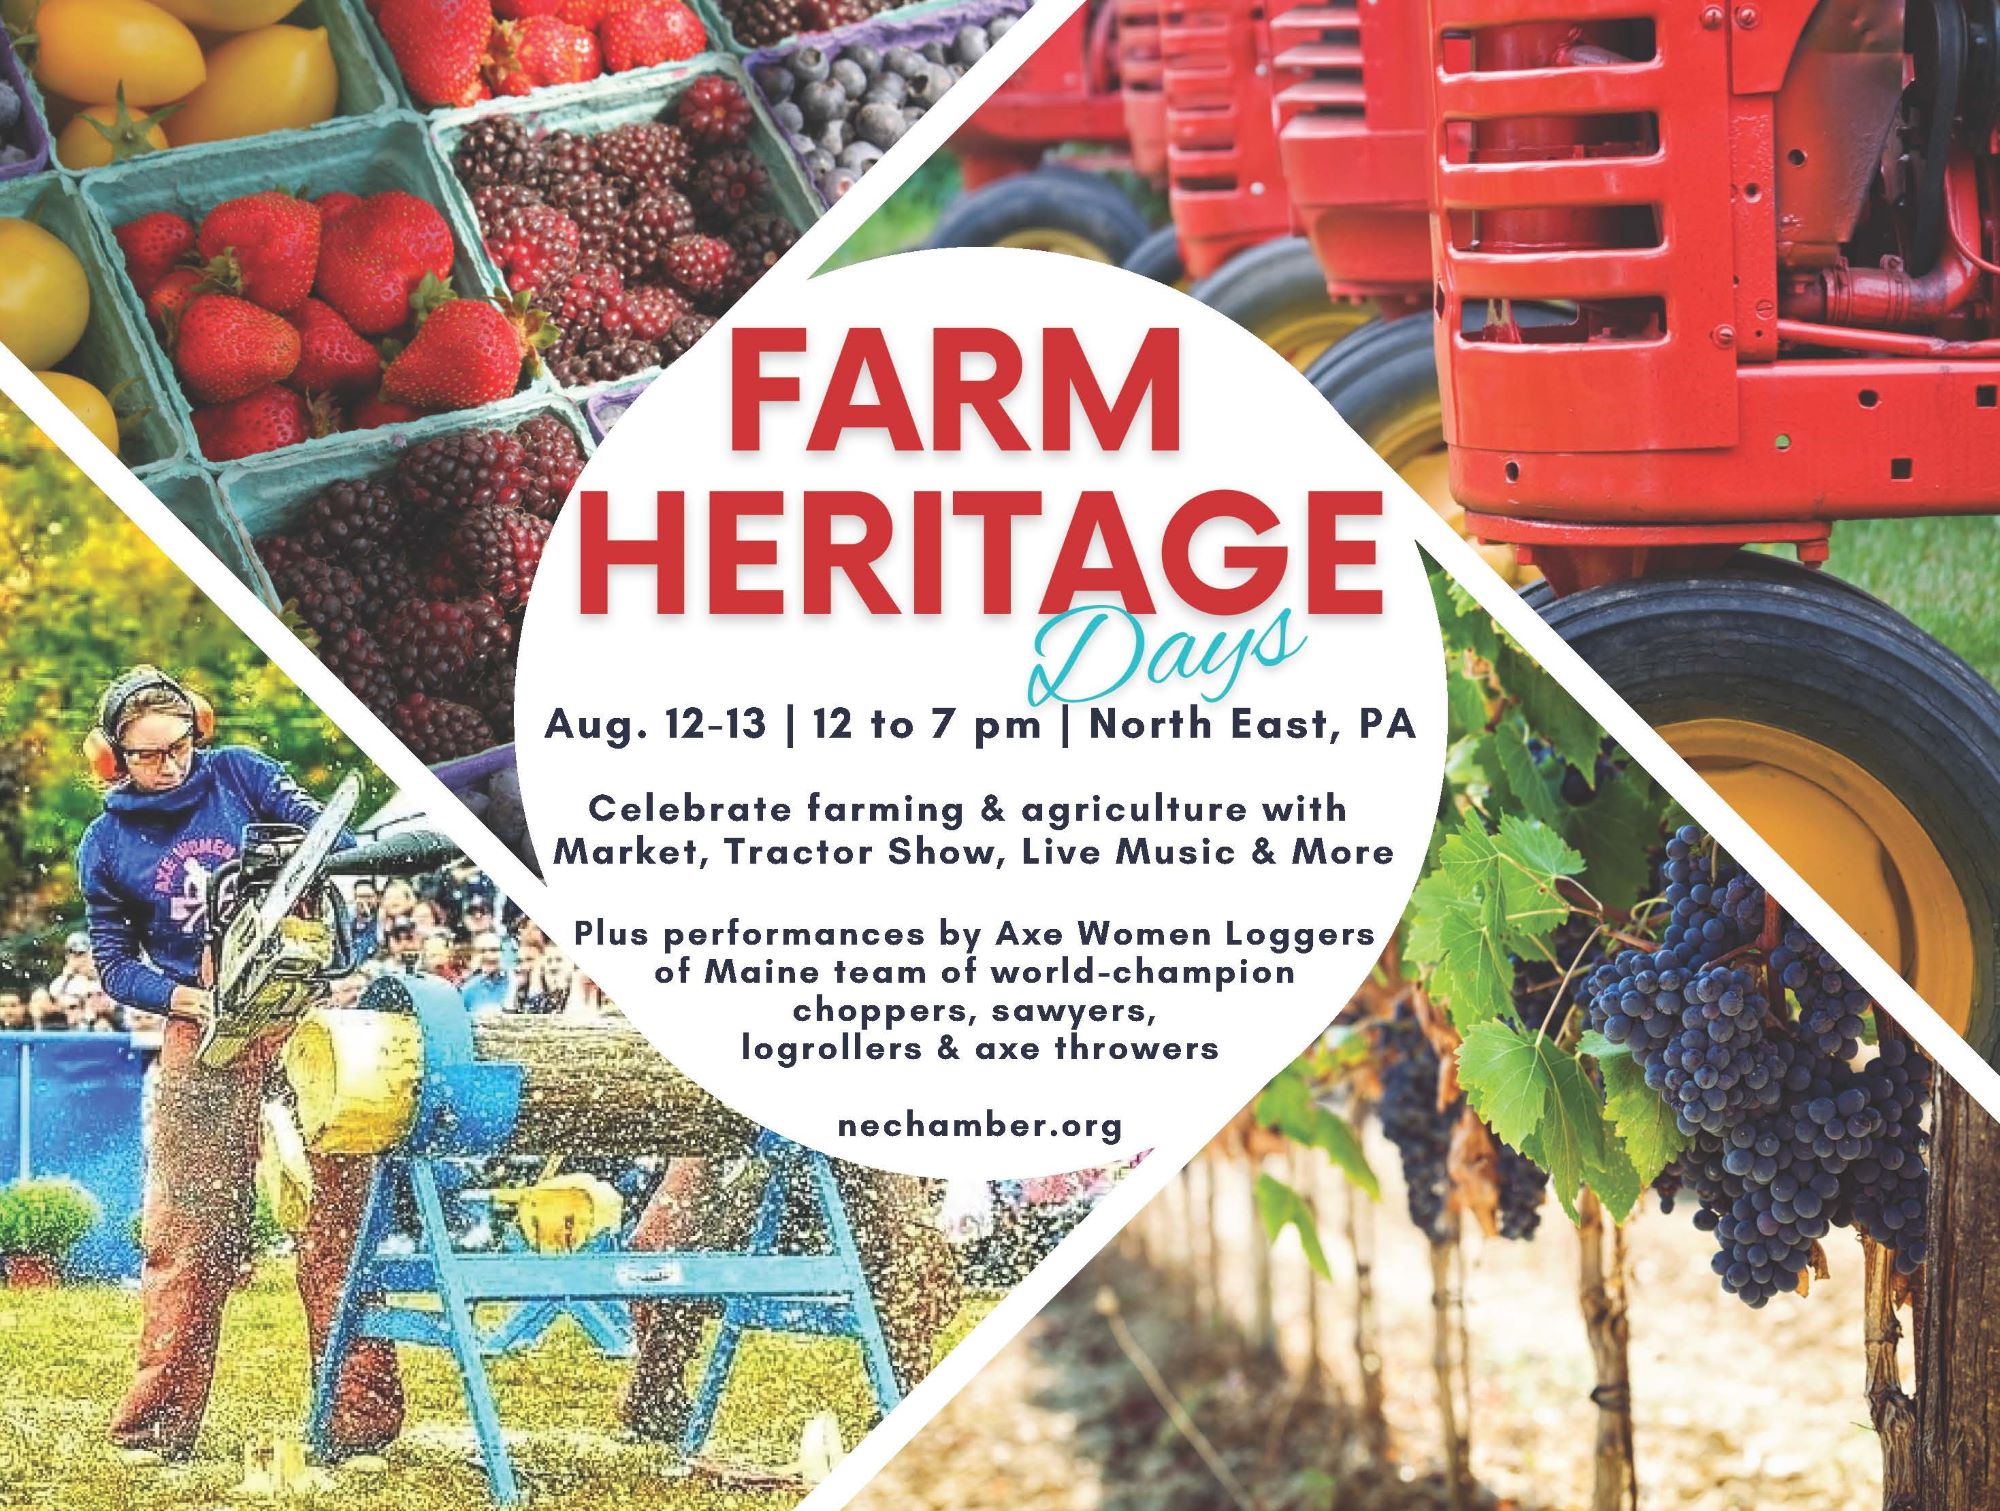 Farm Heritage Days in North East